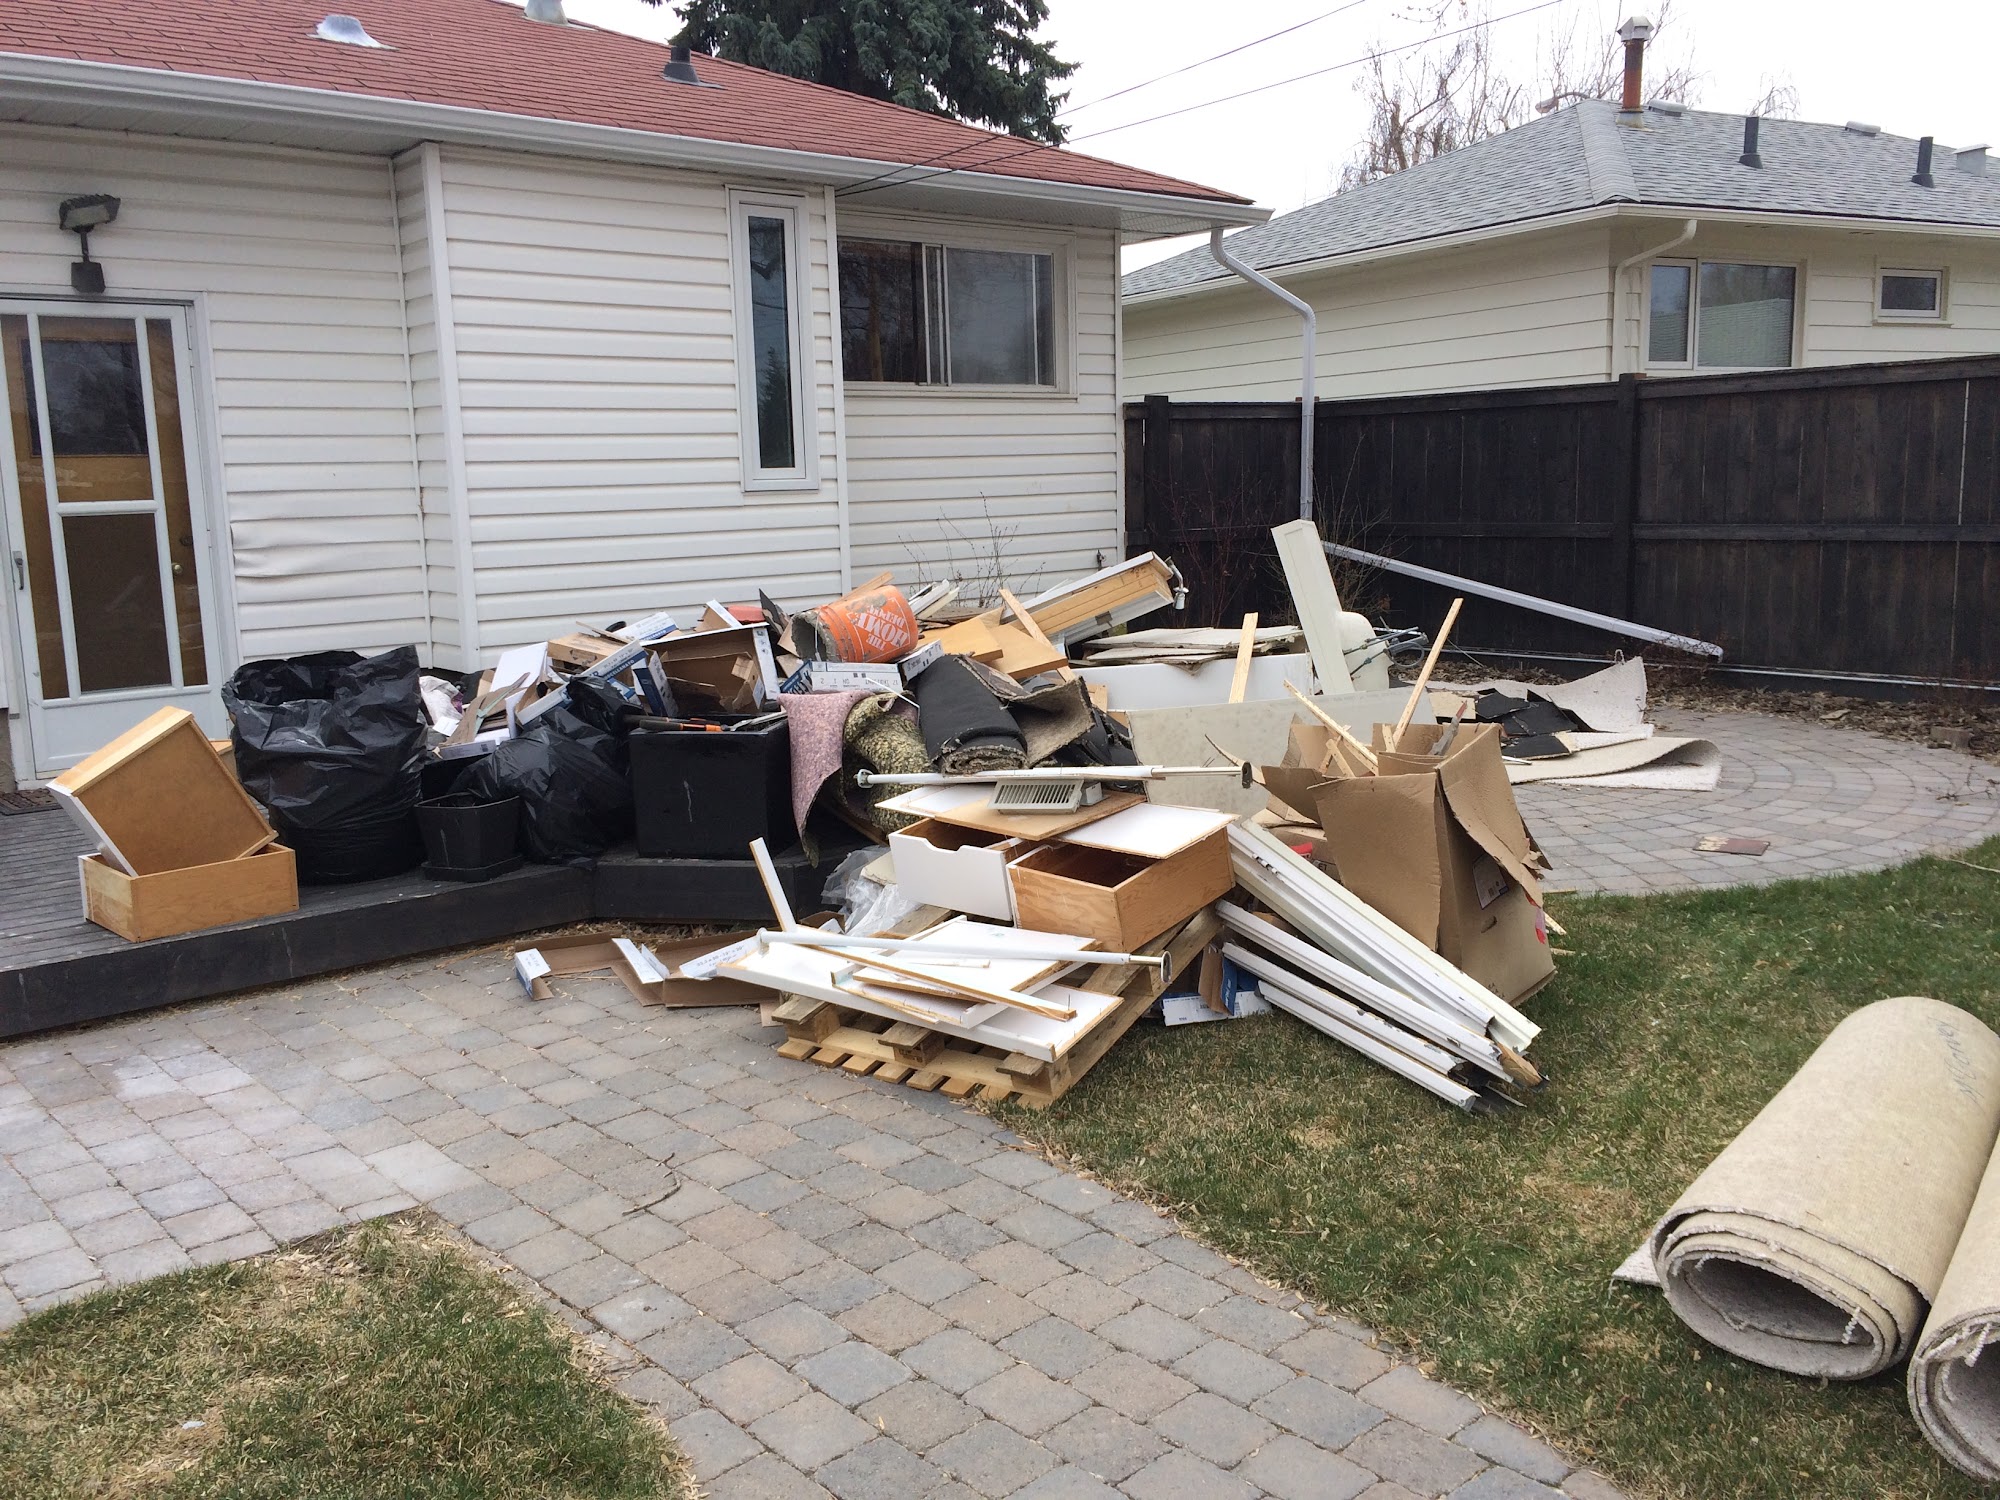 Get Rid Of It Junk Removal & Cleanouts 2 Aspen Ct, Highland Mills New York 10930